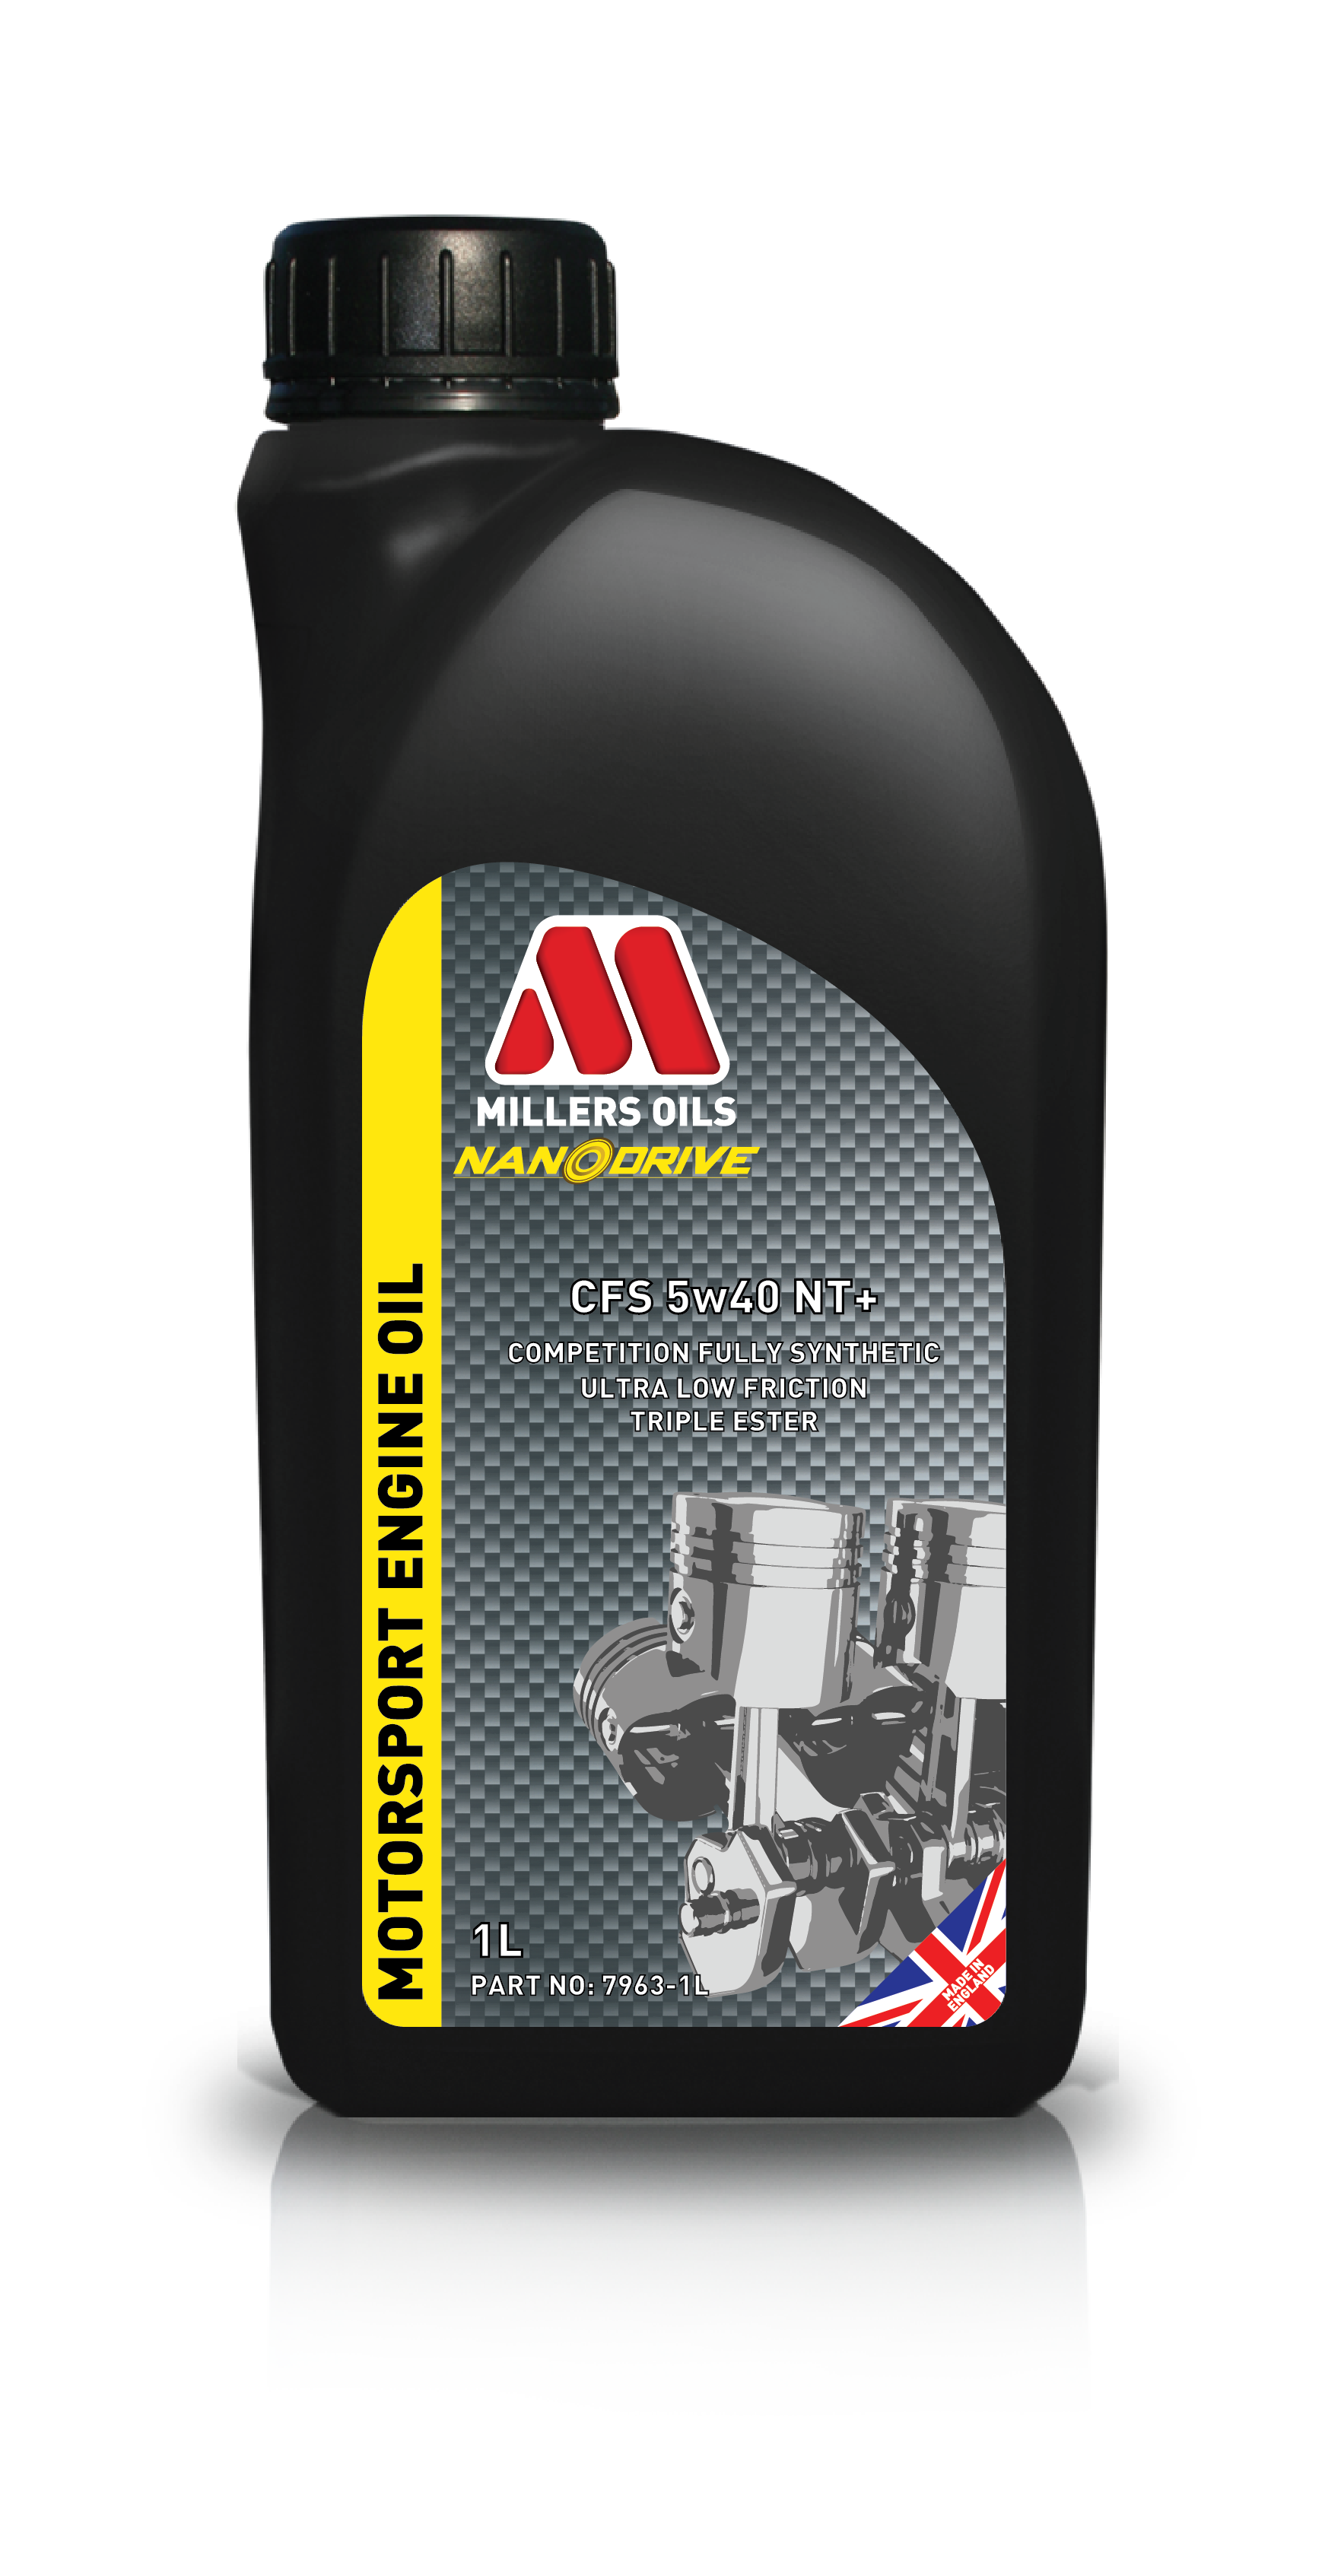 Millers Oils NanoDrive CFS 5w40 NT+ Fully Synthetic Engine Oil